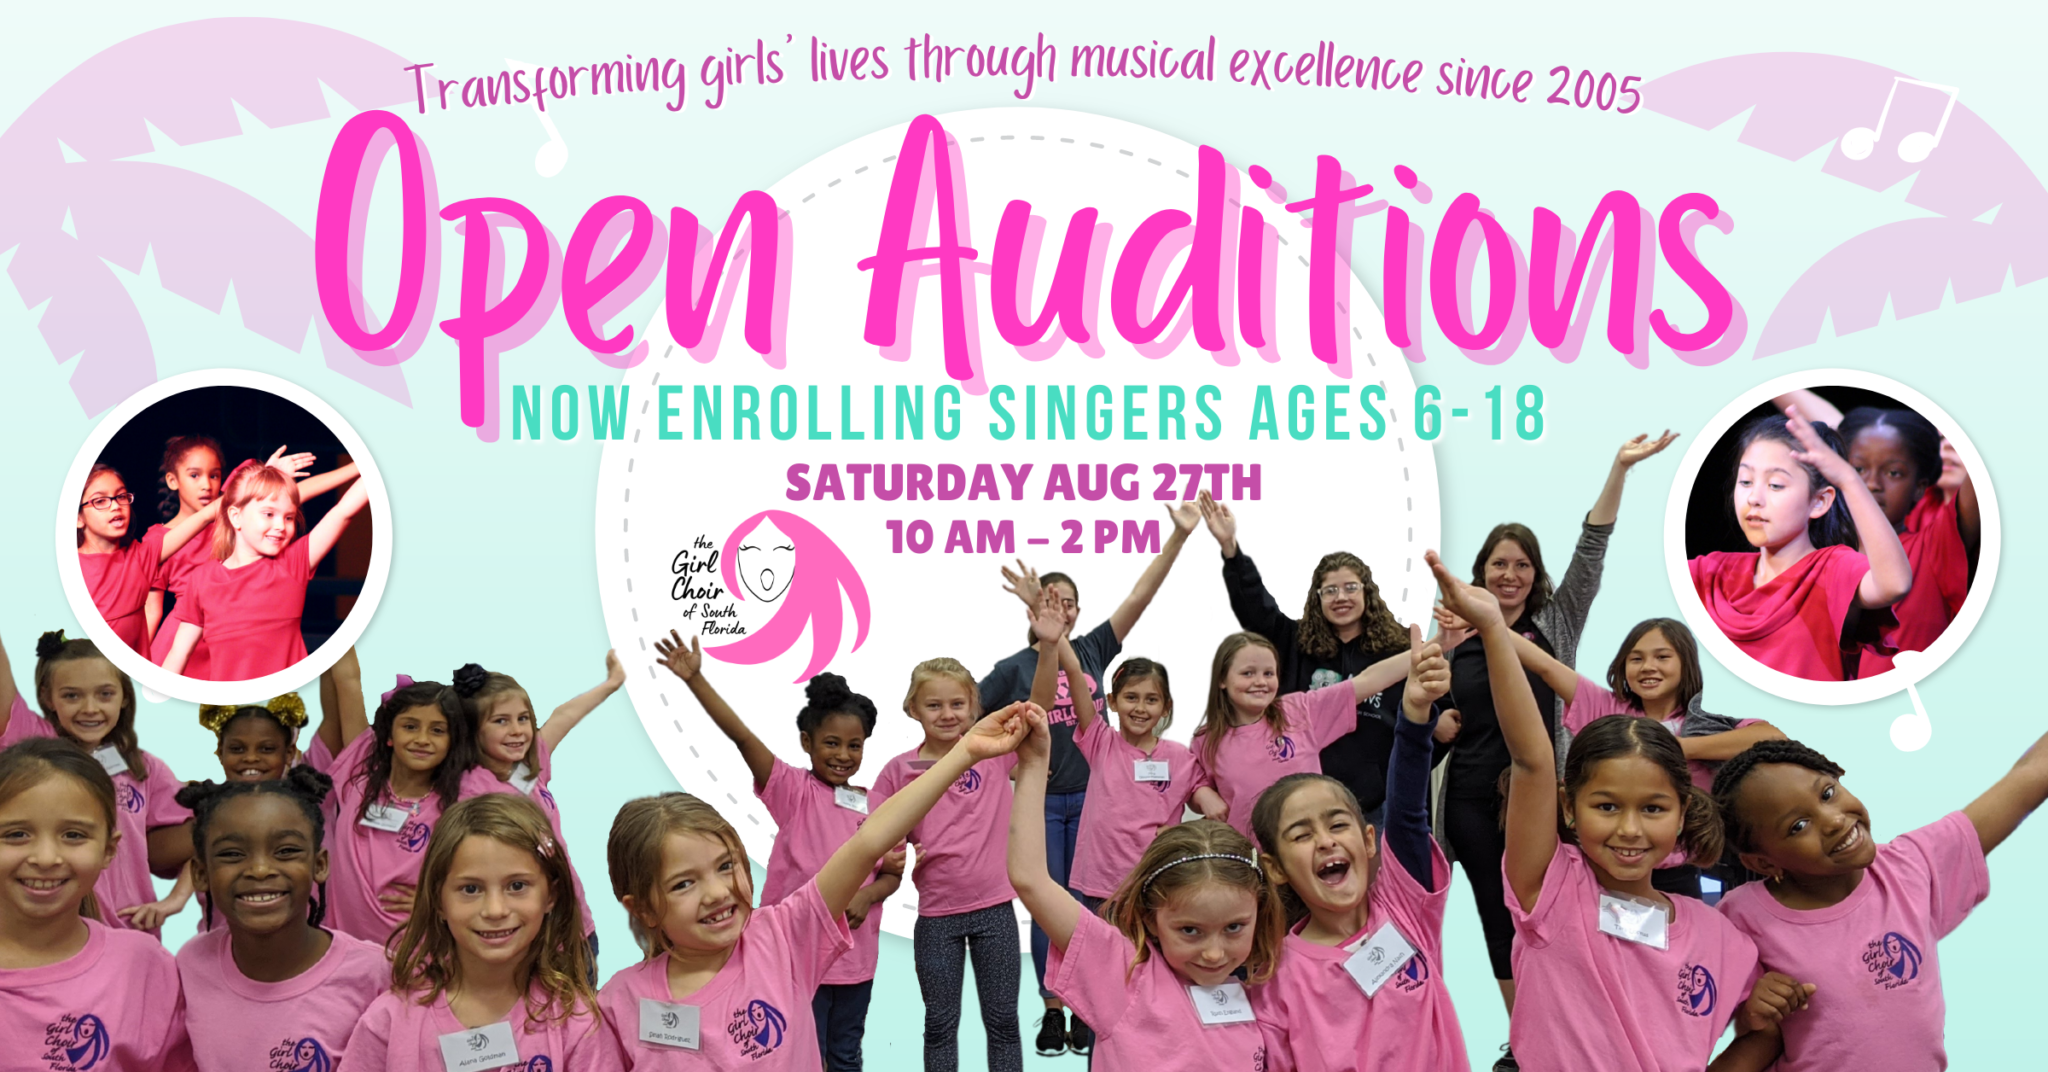 Copy Of Open Audition